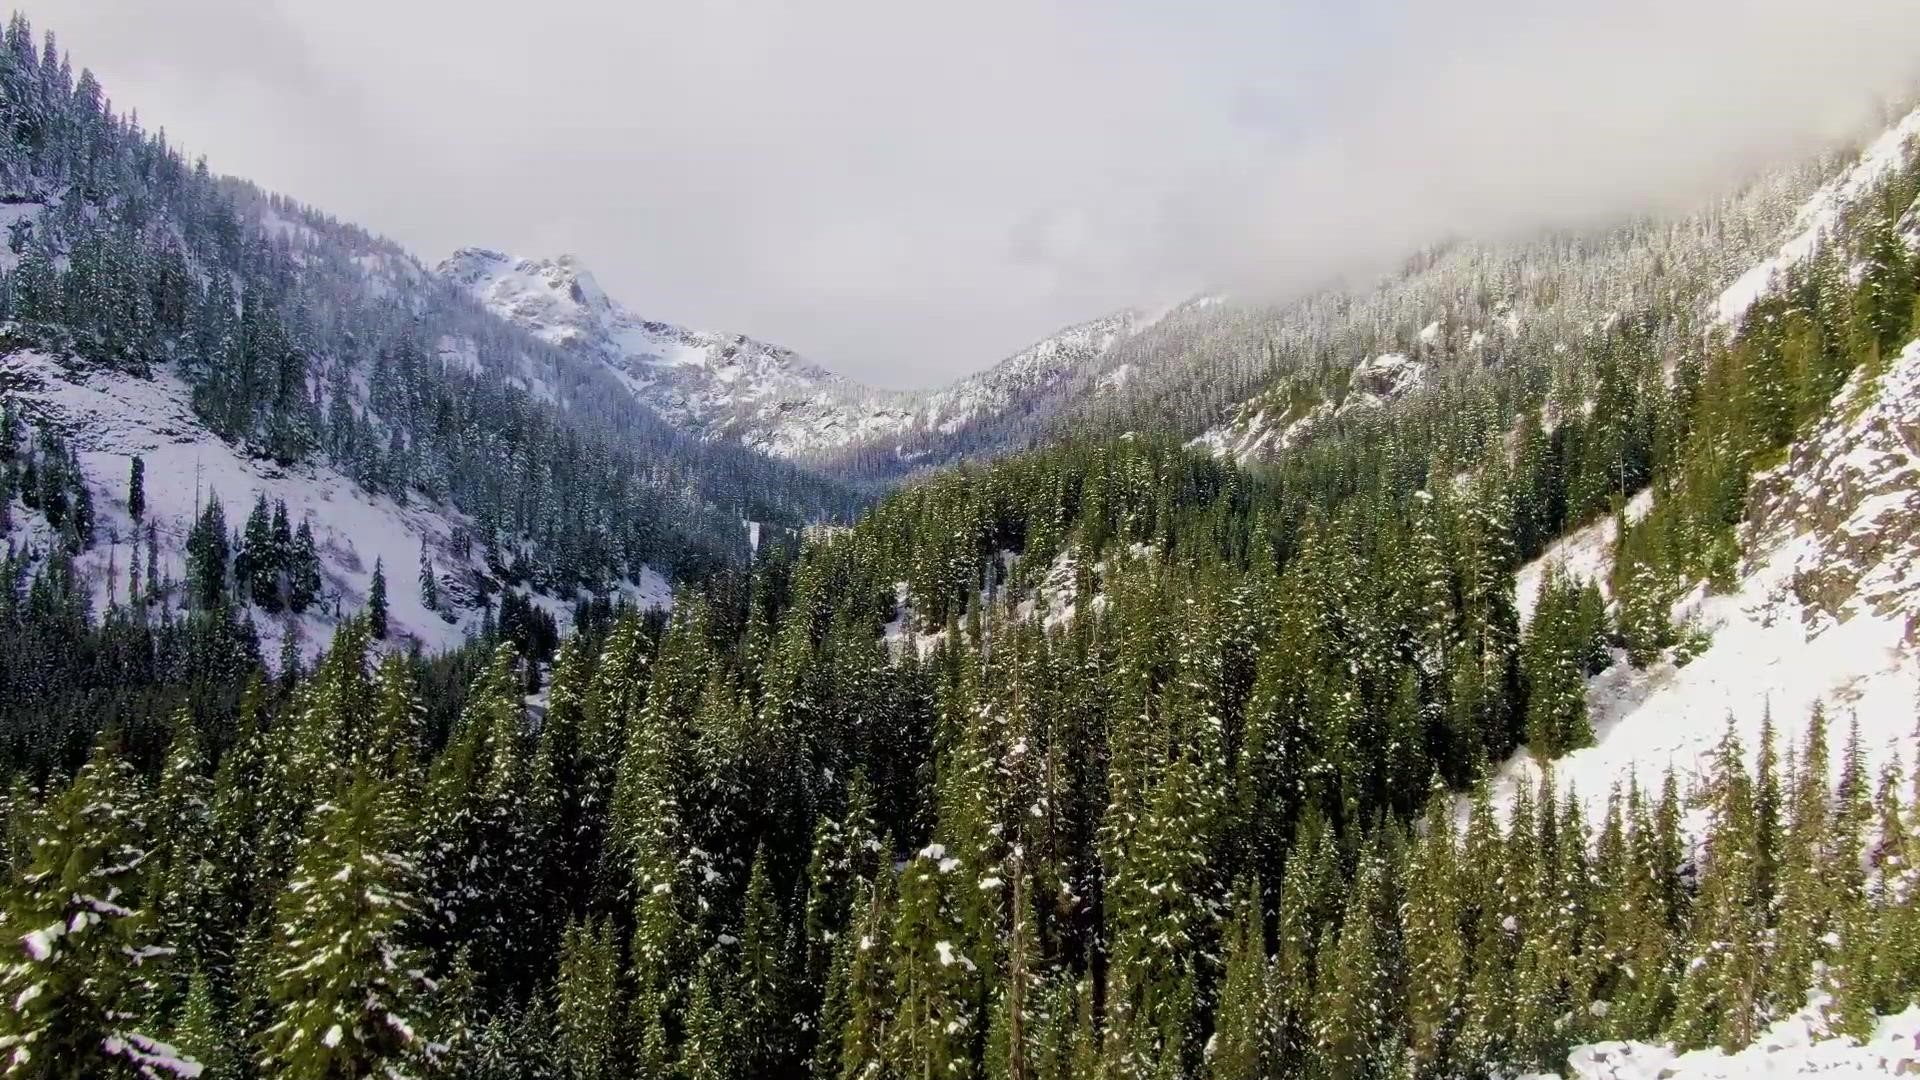 Get a bird's eye view of Snoqualmie Pass before the start of ski season